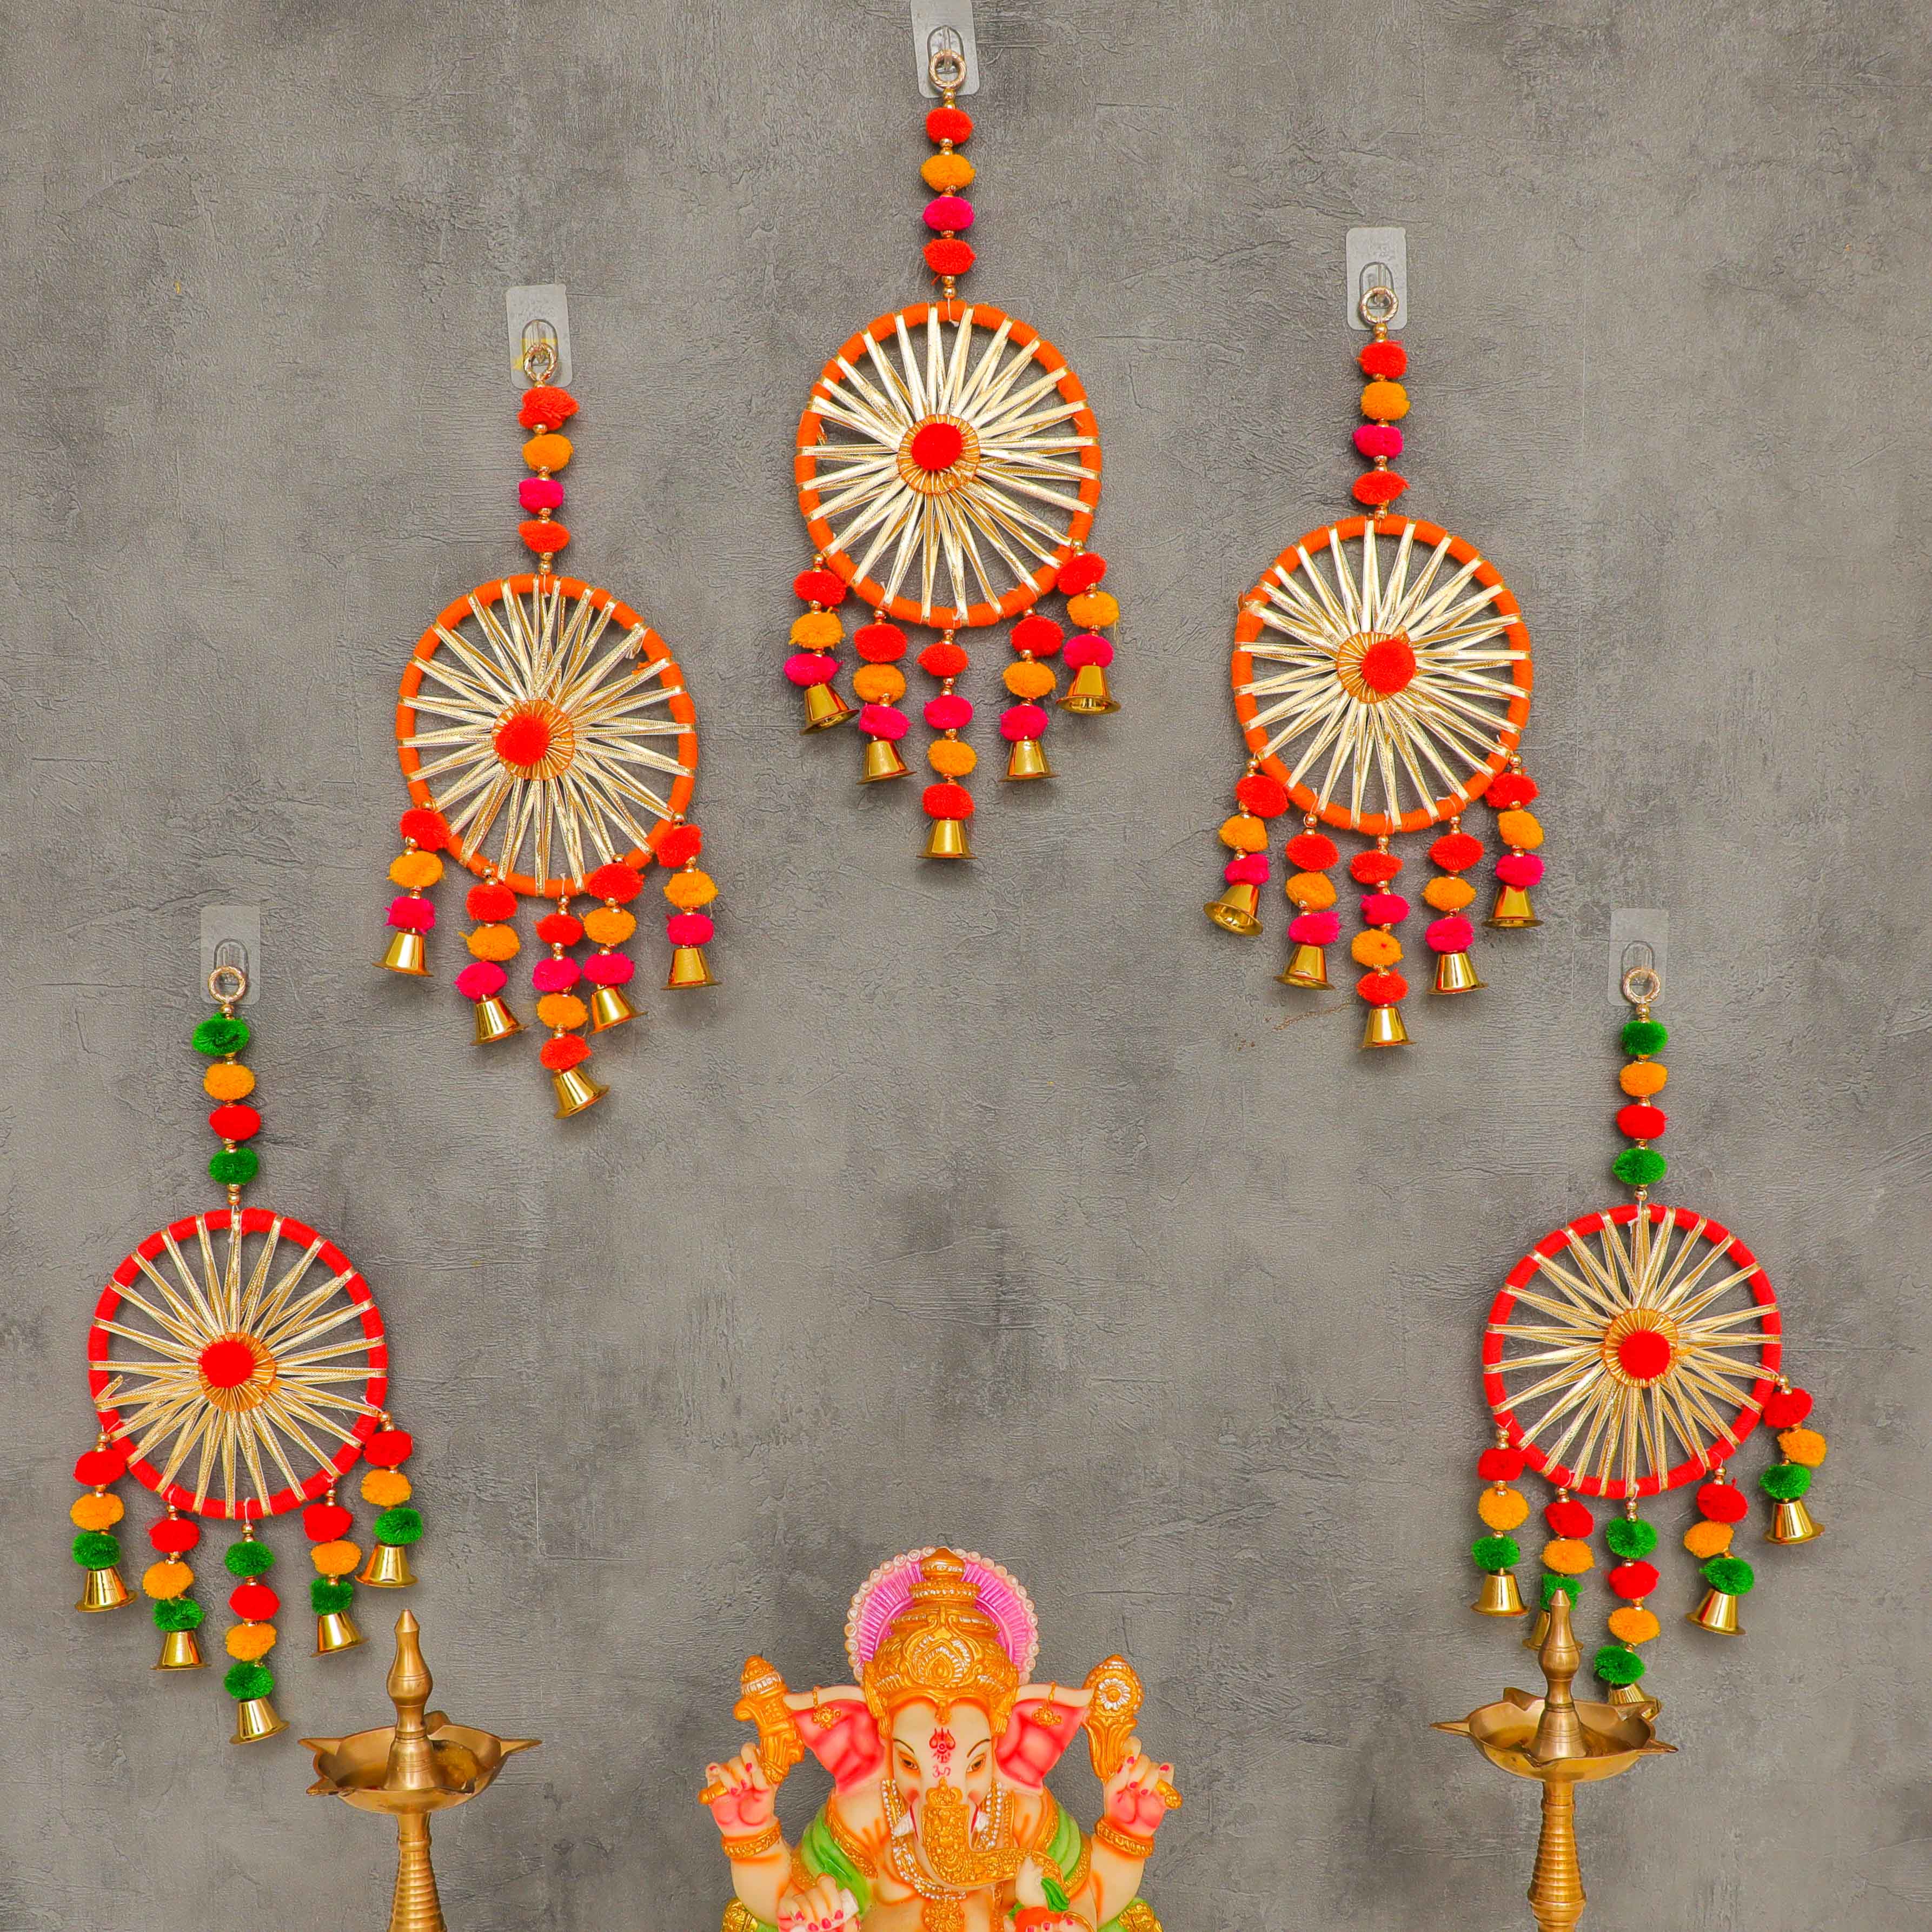 Shop Pom Pom Hanging Decorations from Desifavors in USA & Canada